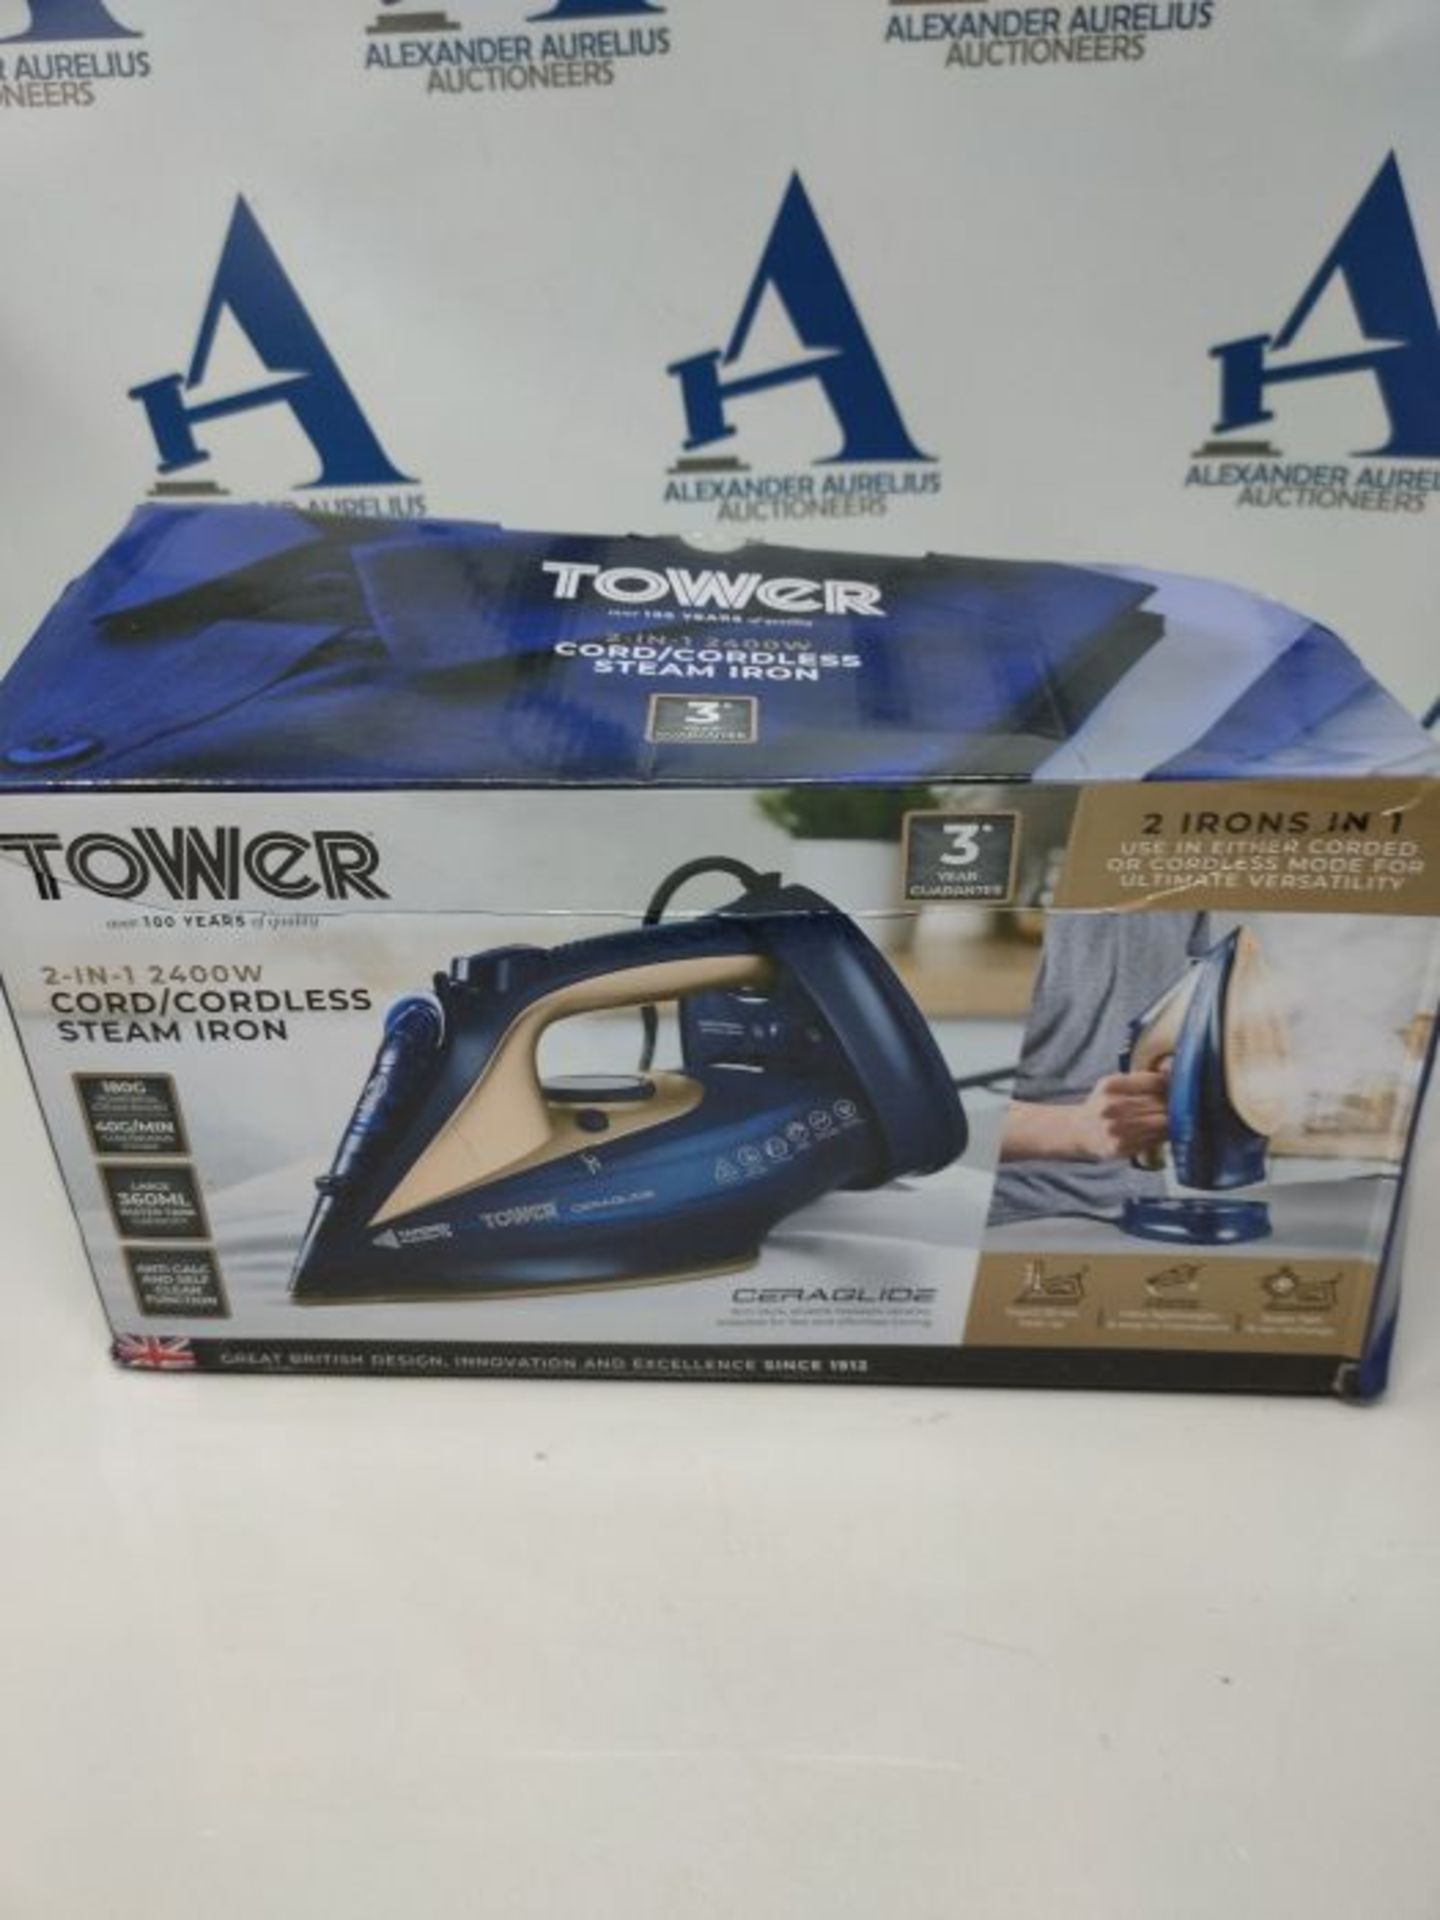 Tower T22008BLG CeraGlide Cordless Steam Iron with Ceramic Soleplate and Variable Stea - Image 4 of 4